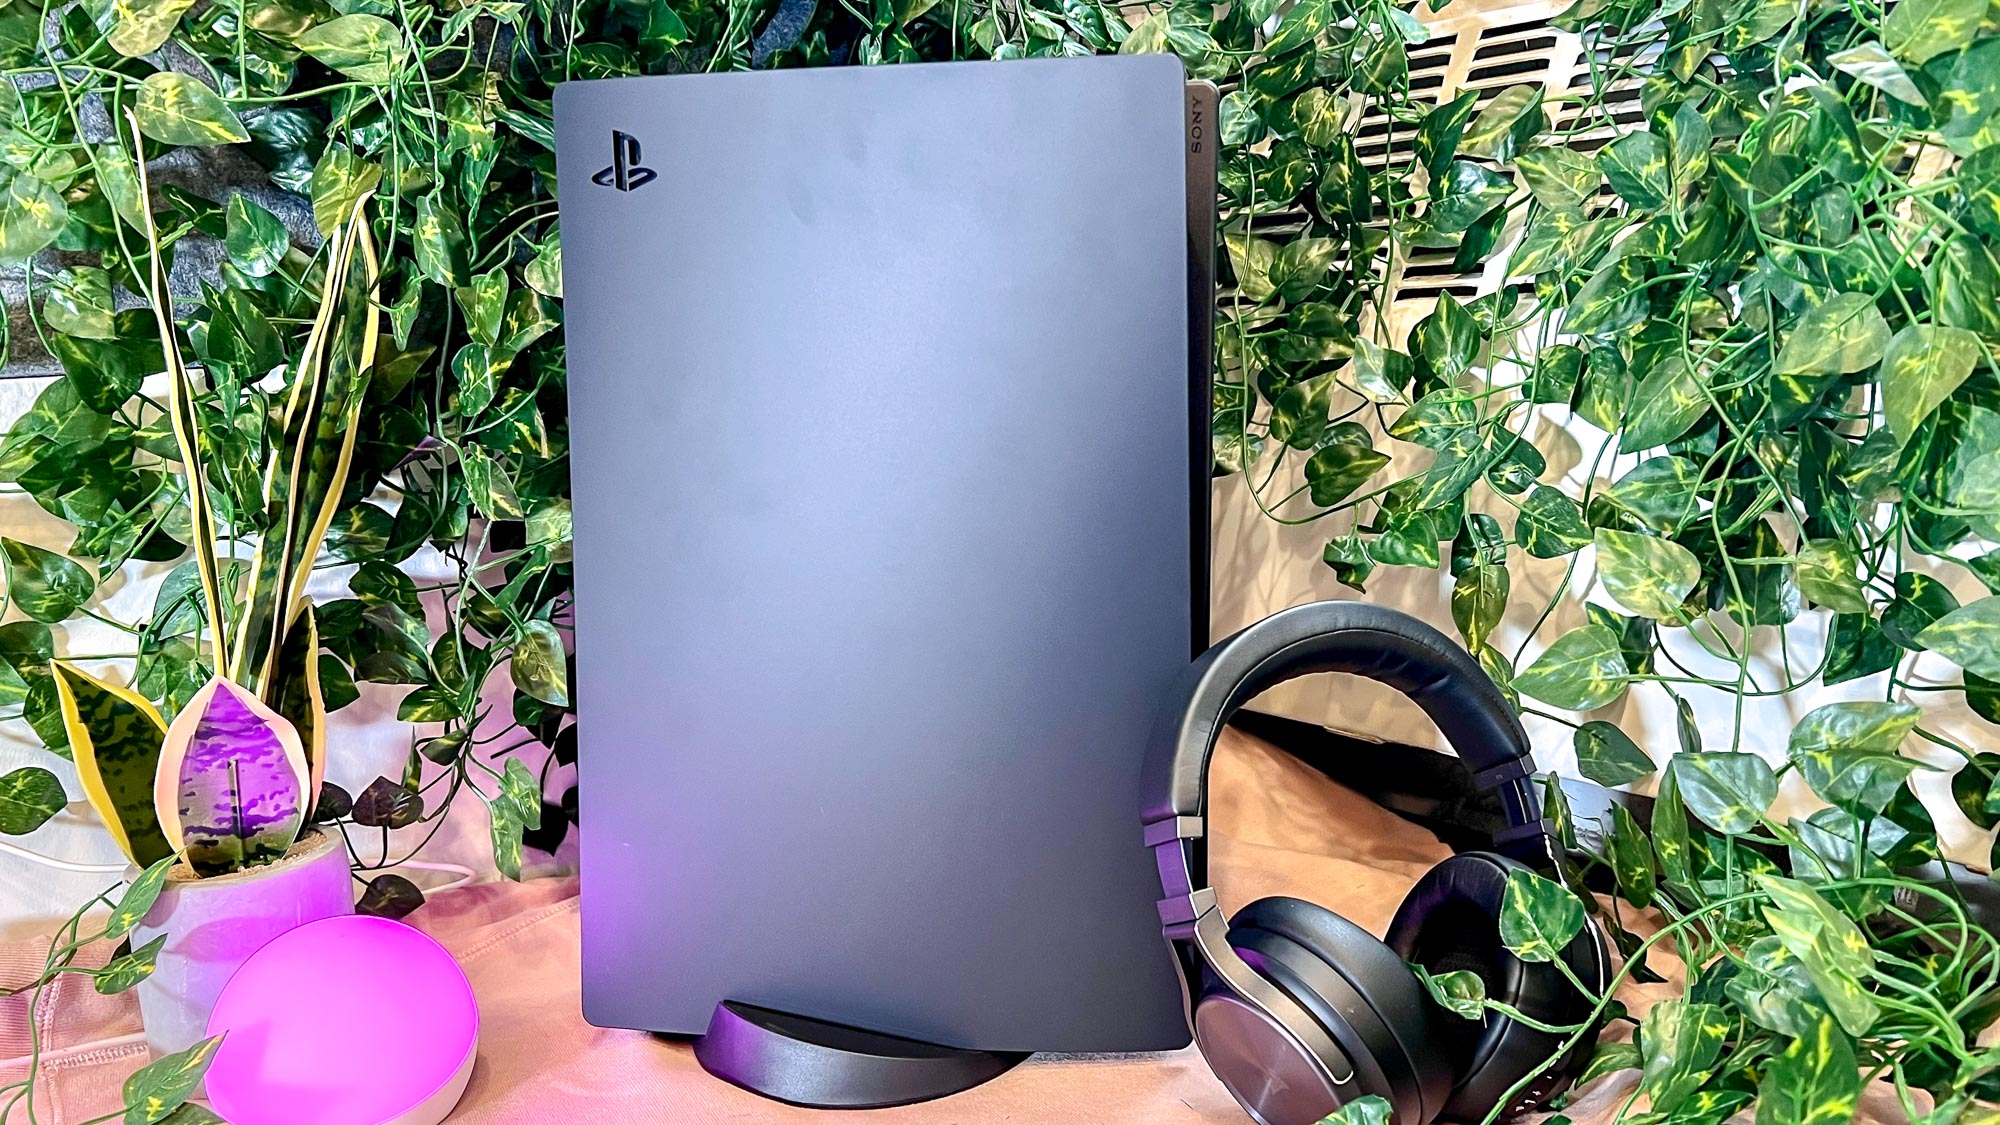 Rumored PS5 Pro and Other Mid-Gen Console Upgrades Not That